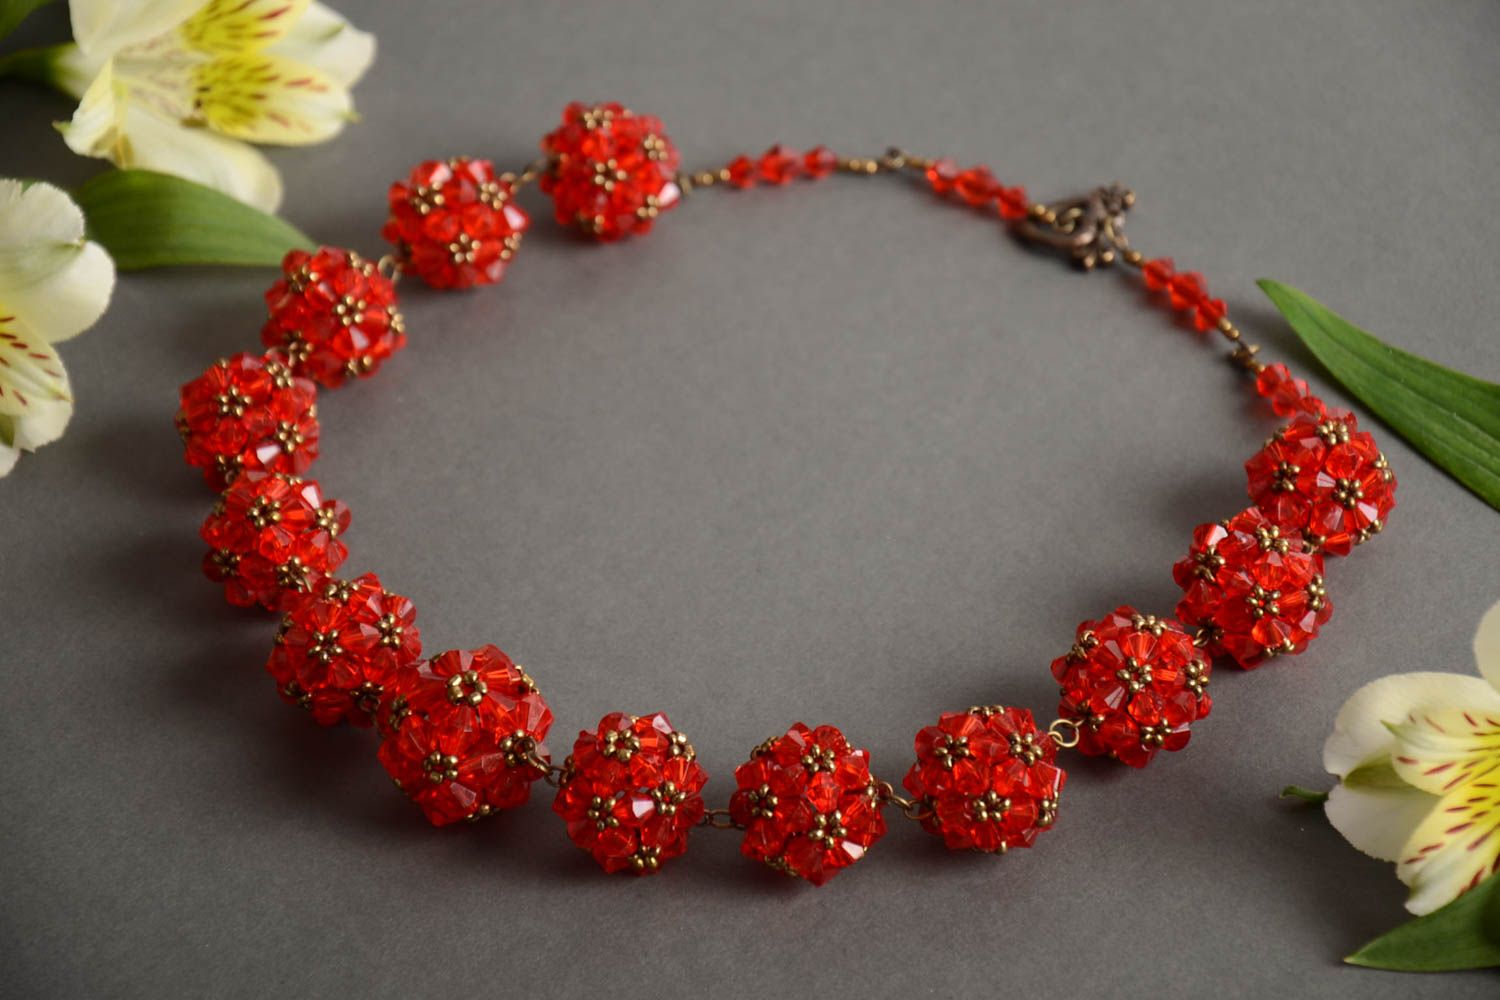 Handmade designer crocheted beaded necklace in bright red color palette photo 1